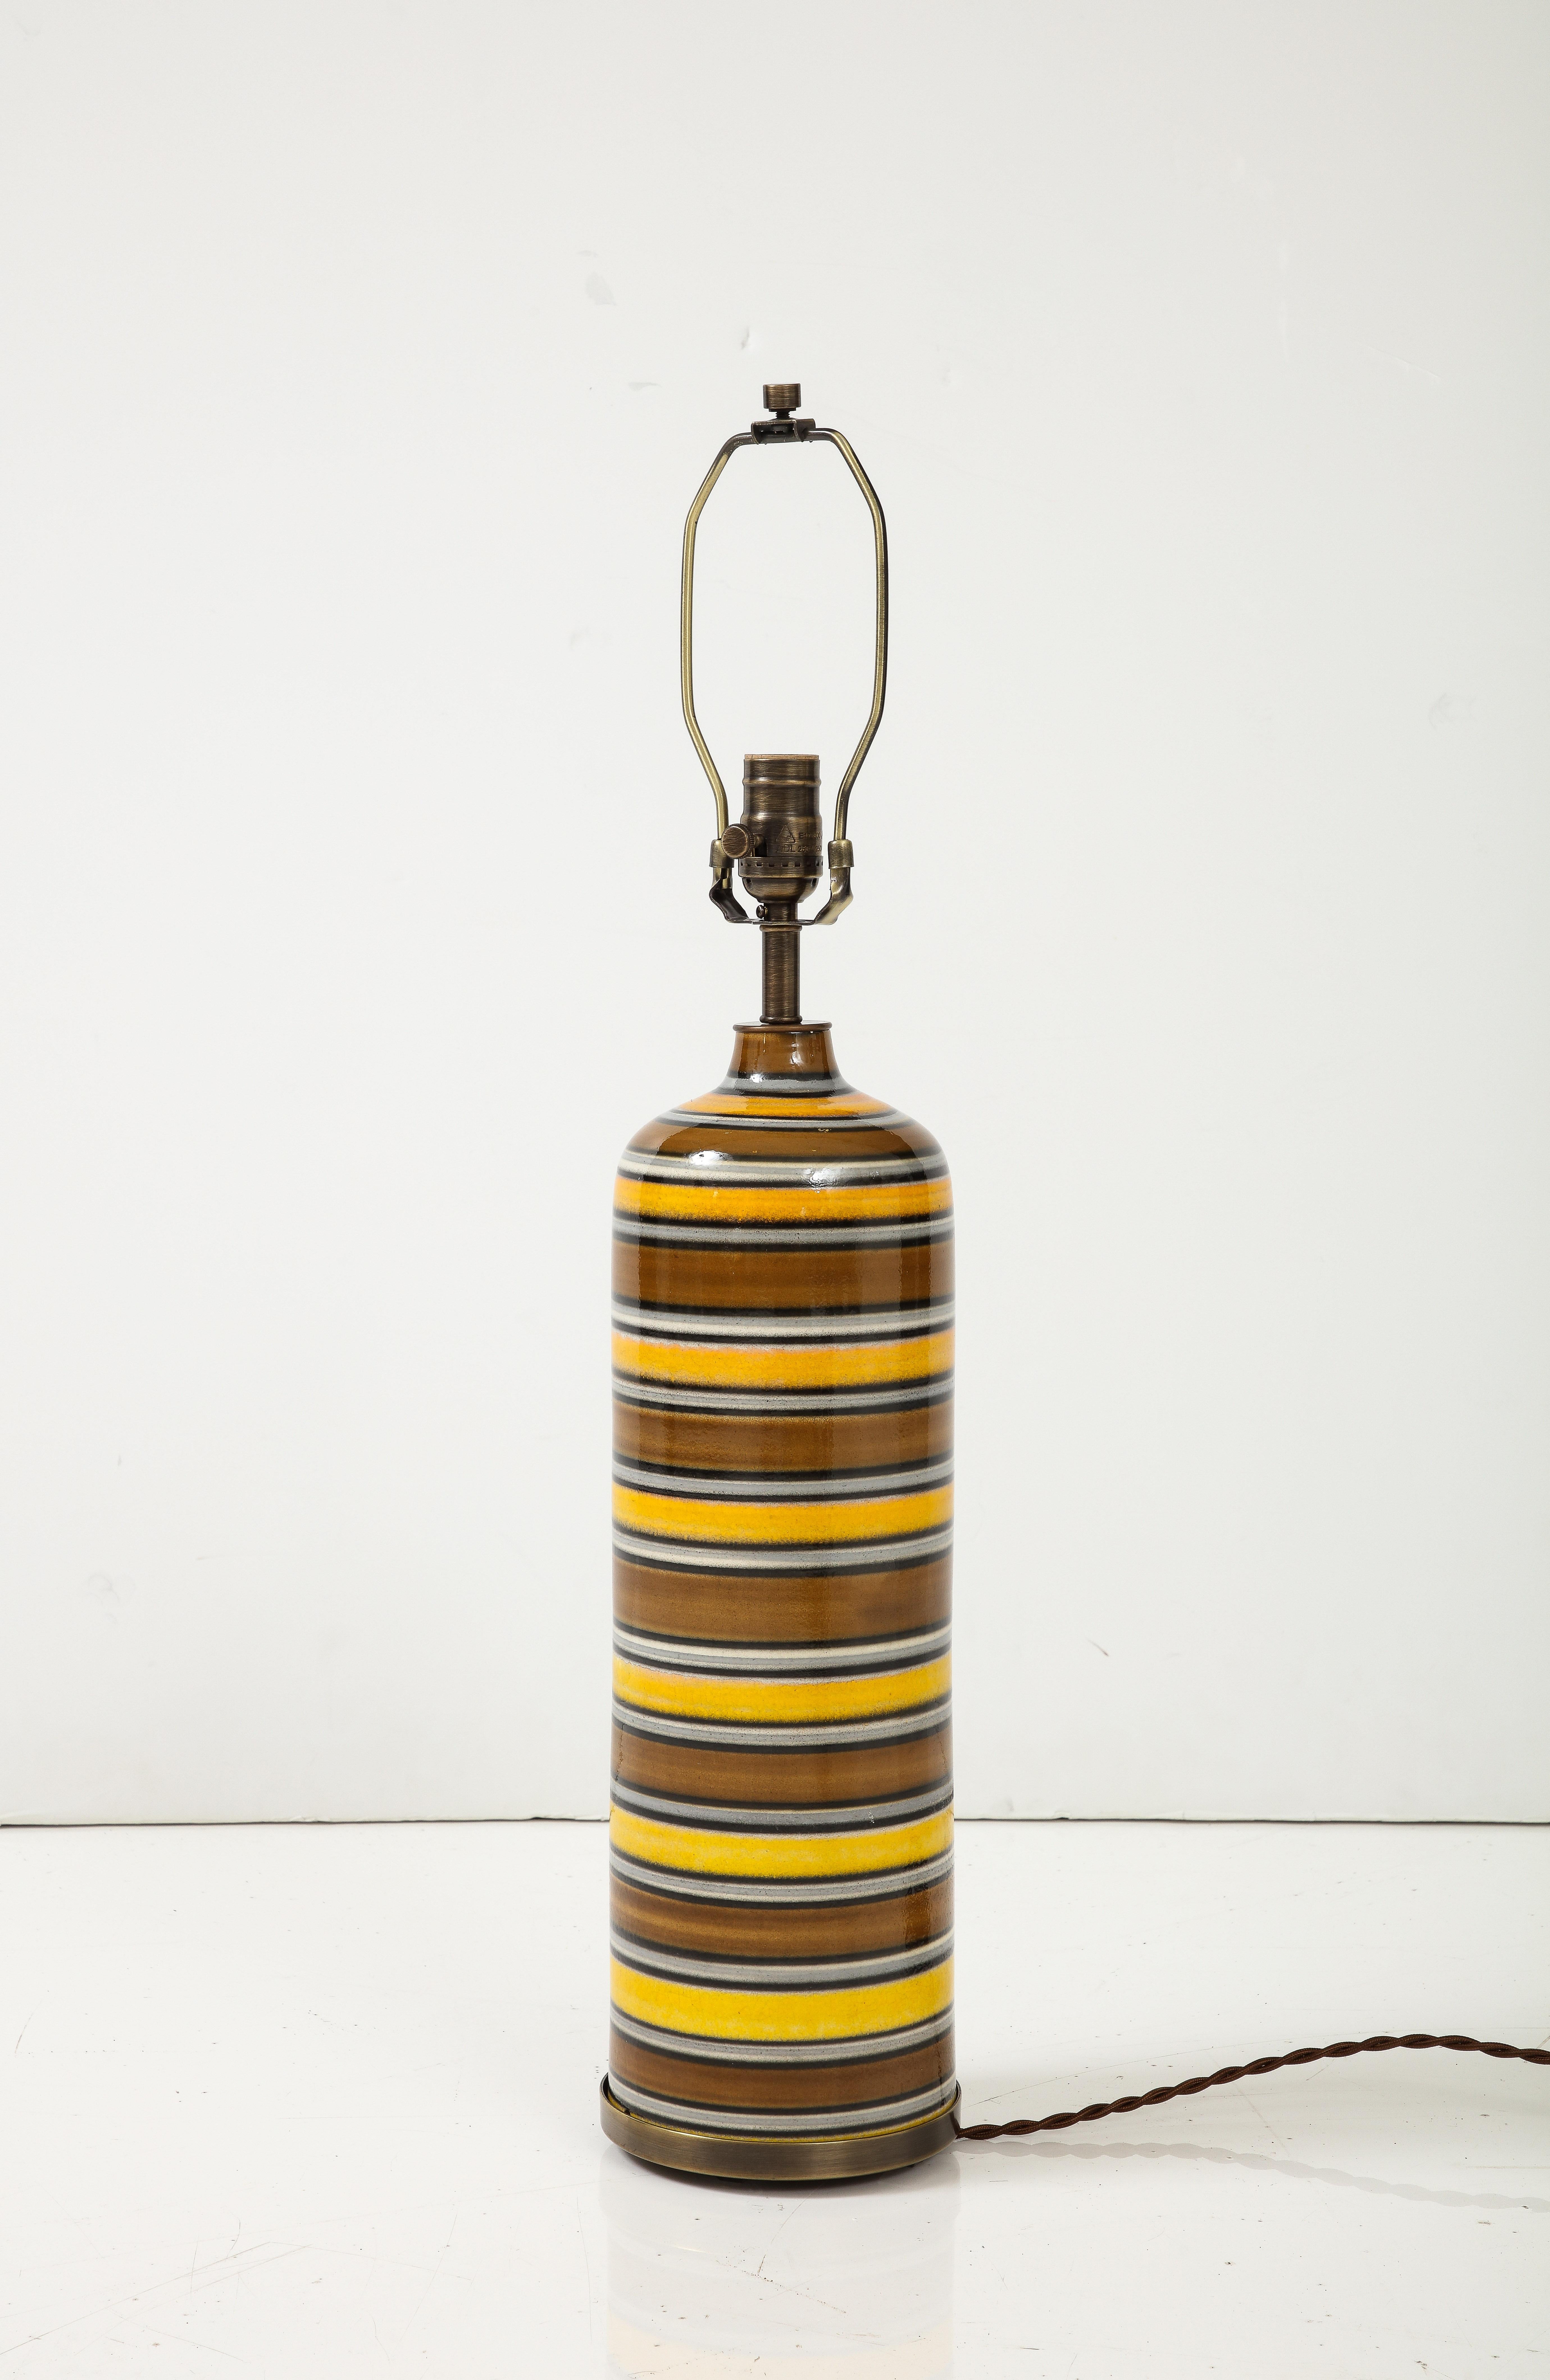 Italian midcentury ceramic lamp featuring a striped column body in brown, yellow and white glaze. Rewired for use in the USA. Uses 1 Edison type bulb, 100 watt max. Ceramic base signed on bottom. Lamp is set into an aged bronze base.